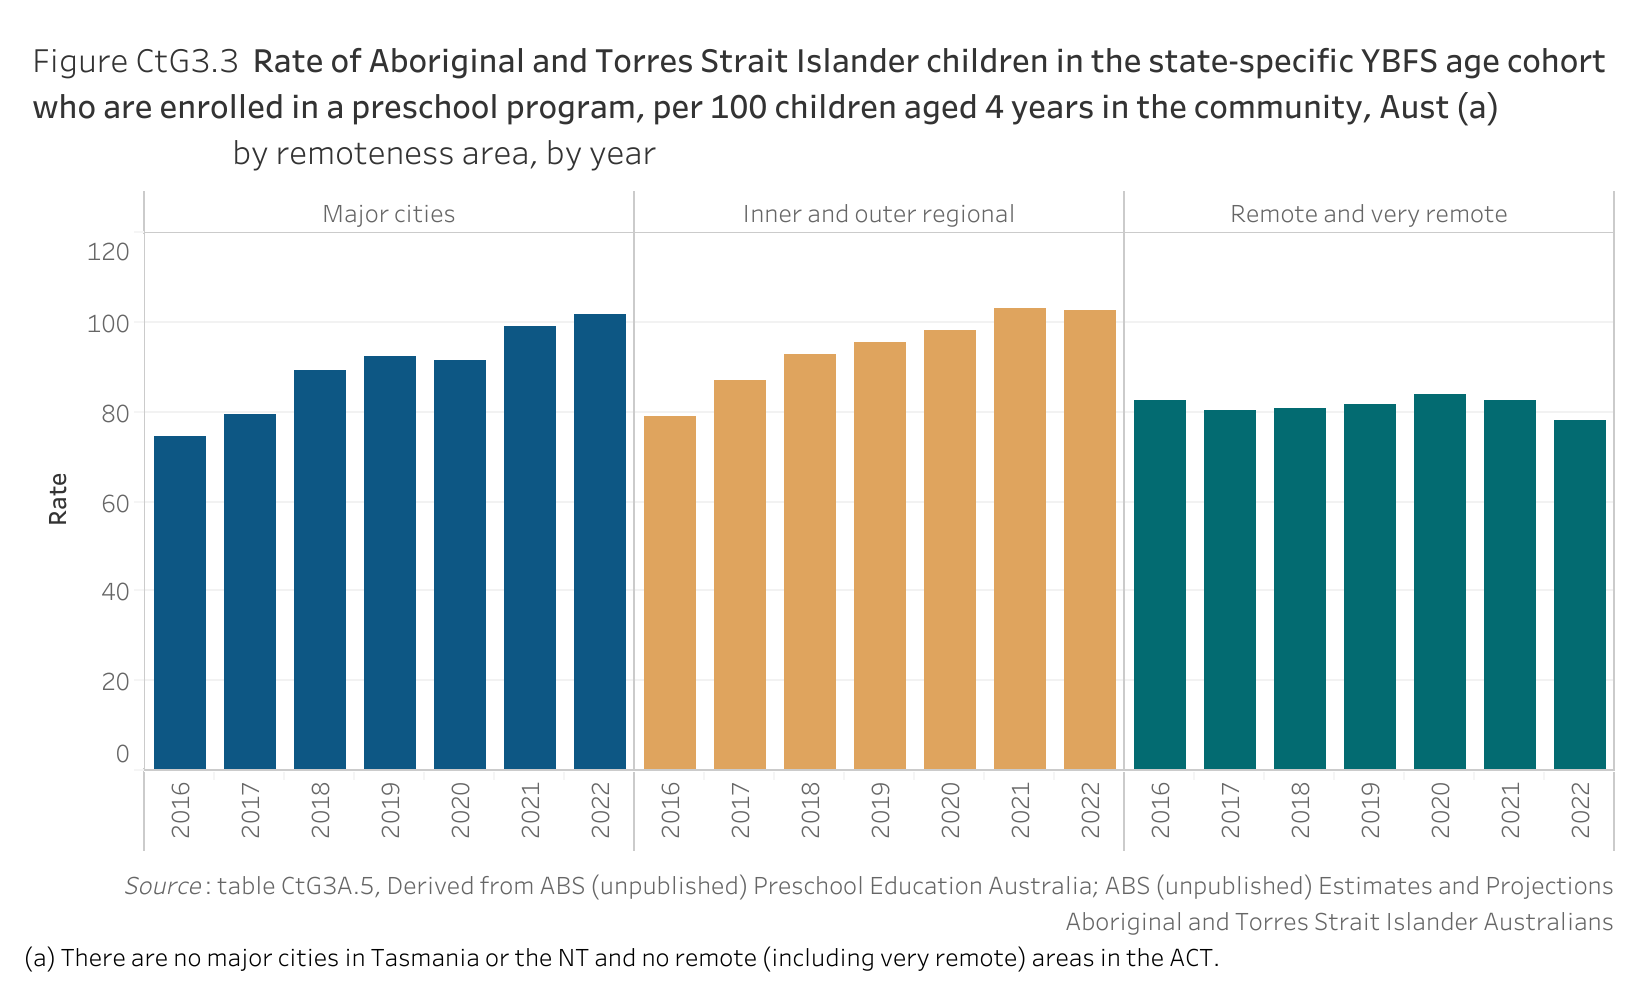 Figure CtG3.3 shows the rate of Aboriginal and Torres Strait Islander children in the state-specific Year Before Full time Schooling age cohort who are enrolled in a preschool program, per 100 children aged 4 years in the community, Australia, by remoteness area, by year. More details can be found within the text near this image.